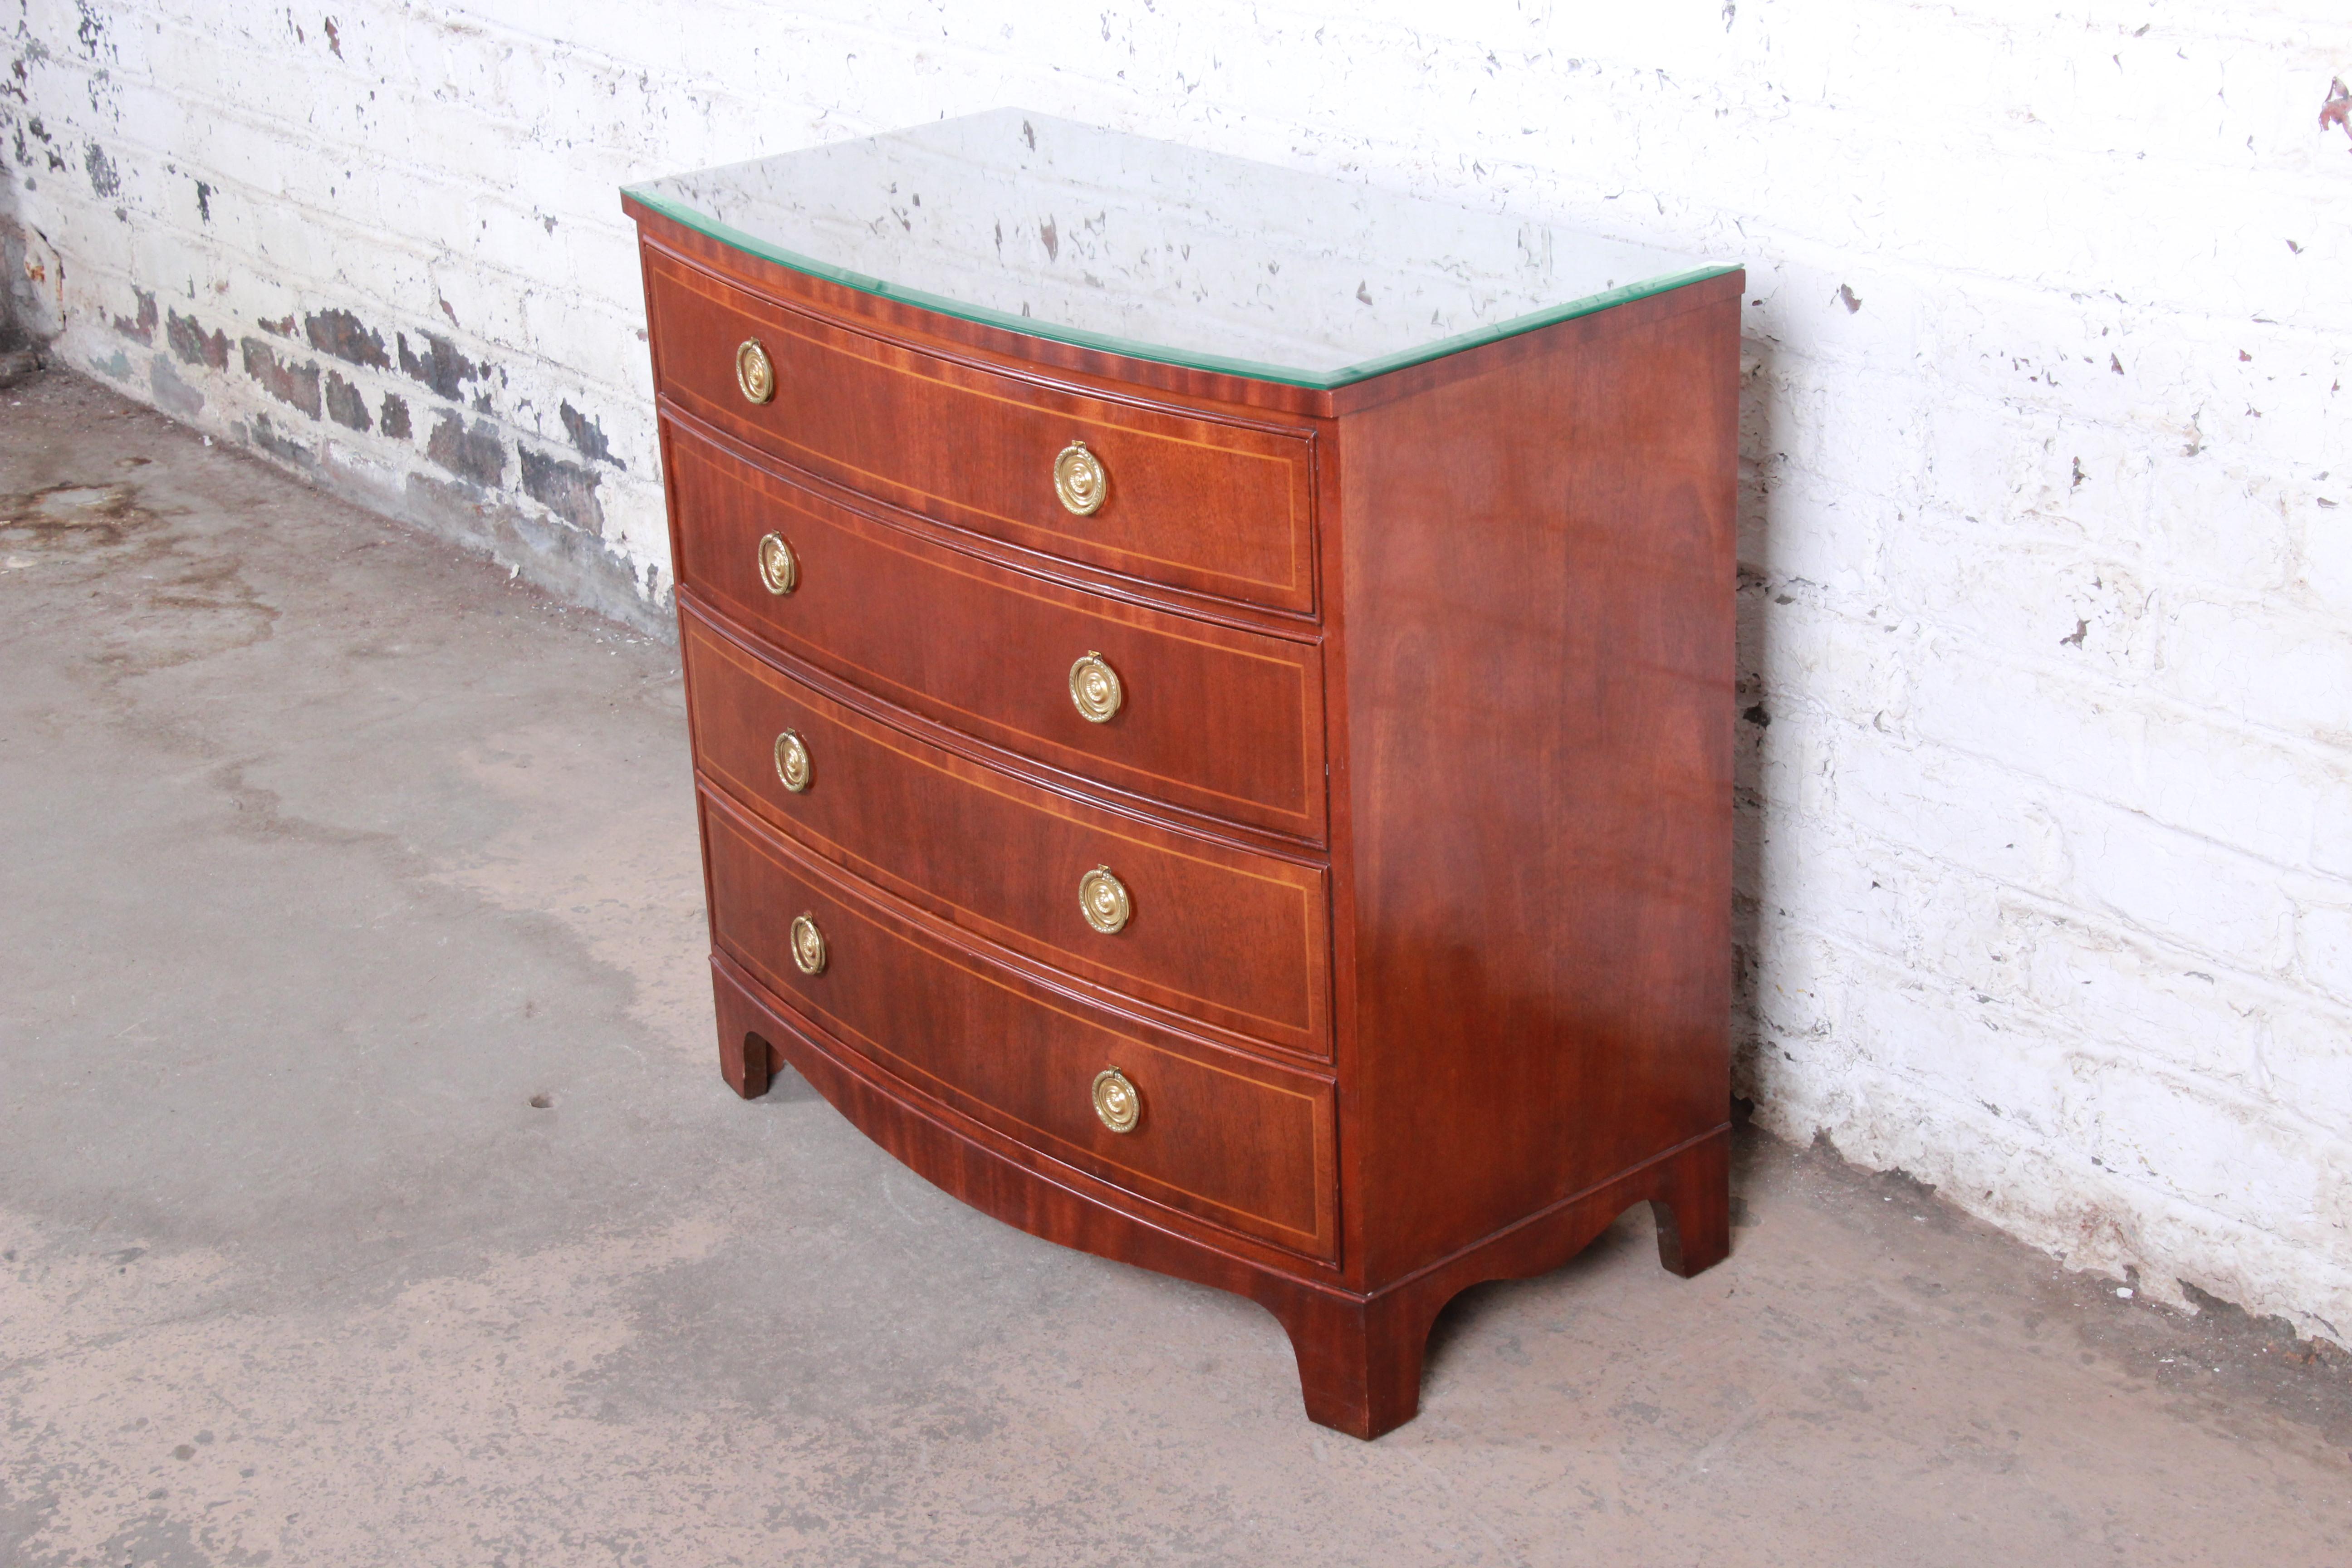 Baker Furniture Georgian banded mahogany bow front four-drawer chest of drawers

Made by Baker Furniture

USA, circa 1980s

Book-matched mahogany and satinwood banding and brass ring drawer pulls and beveled glass top

Measures: 34